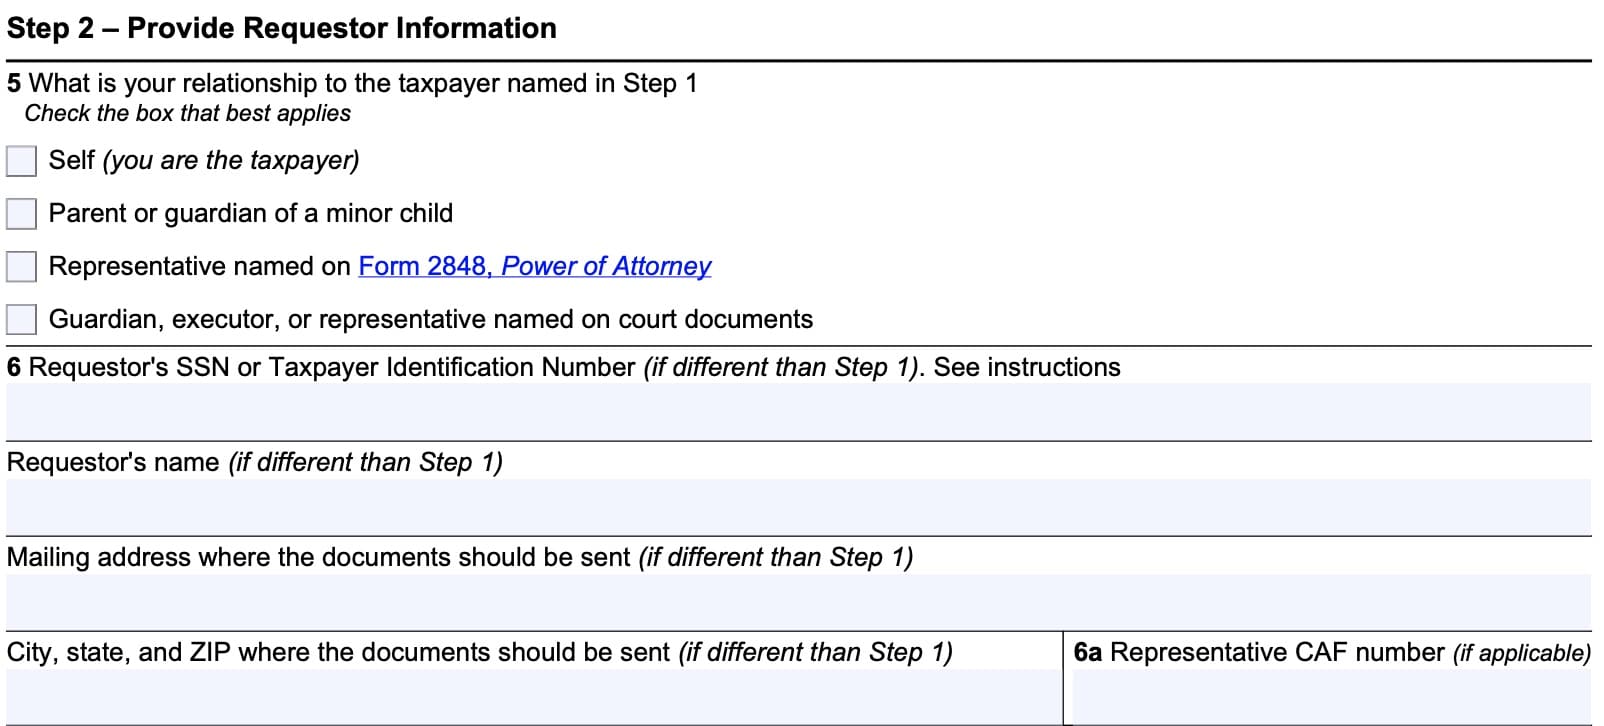 irs form 4506-f, step 2: provide requestor information